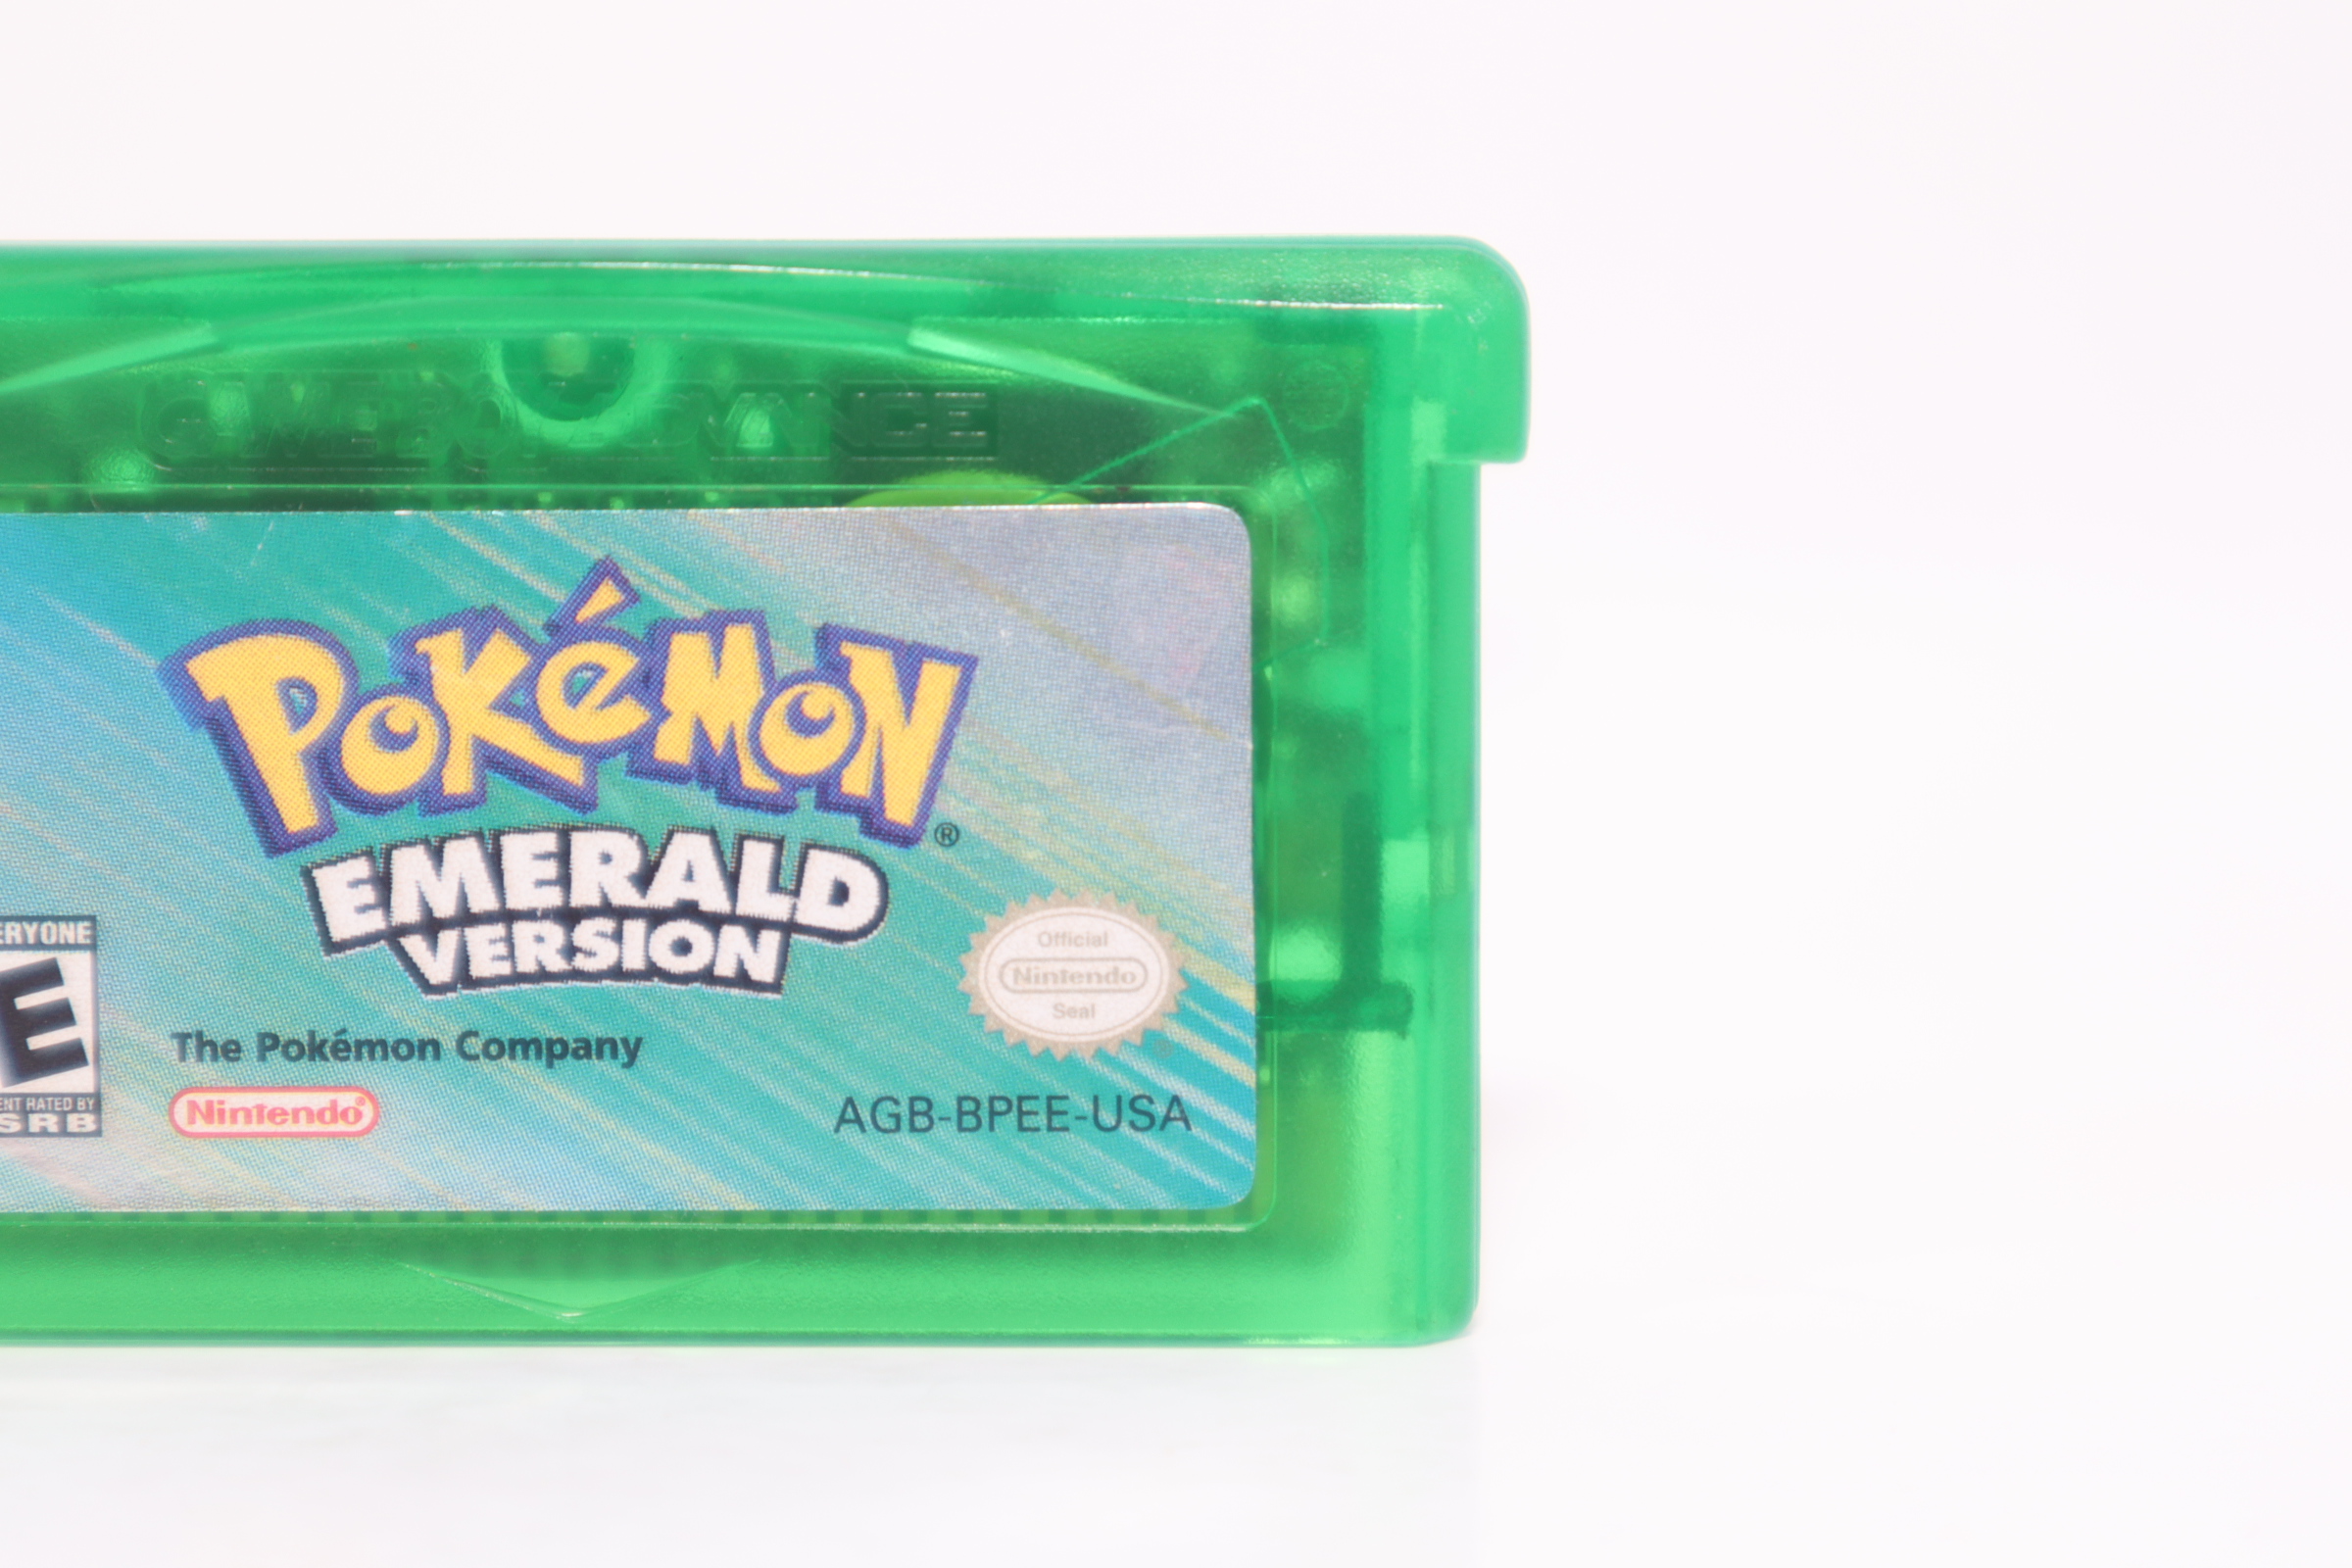 Pokémon Emerald is now 15 years old in North America – Nintendo Wire